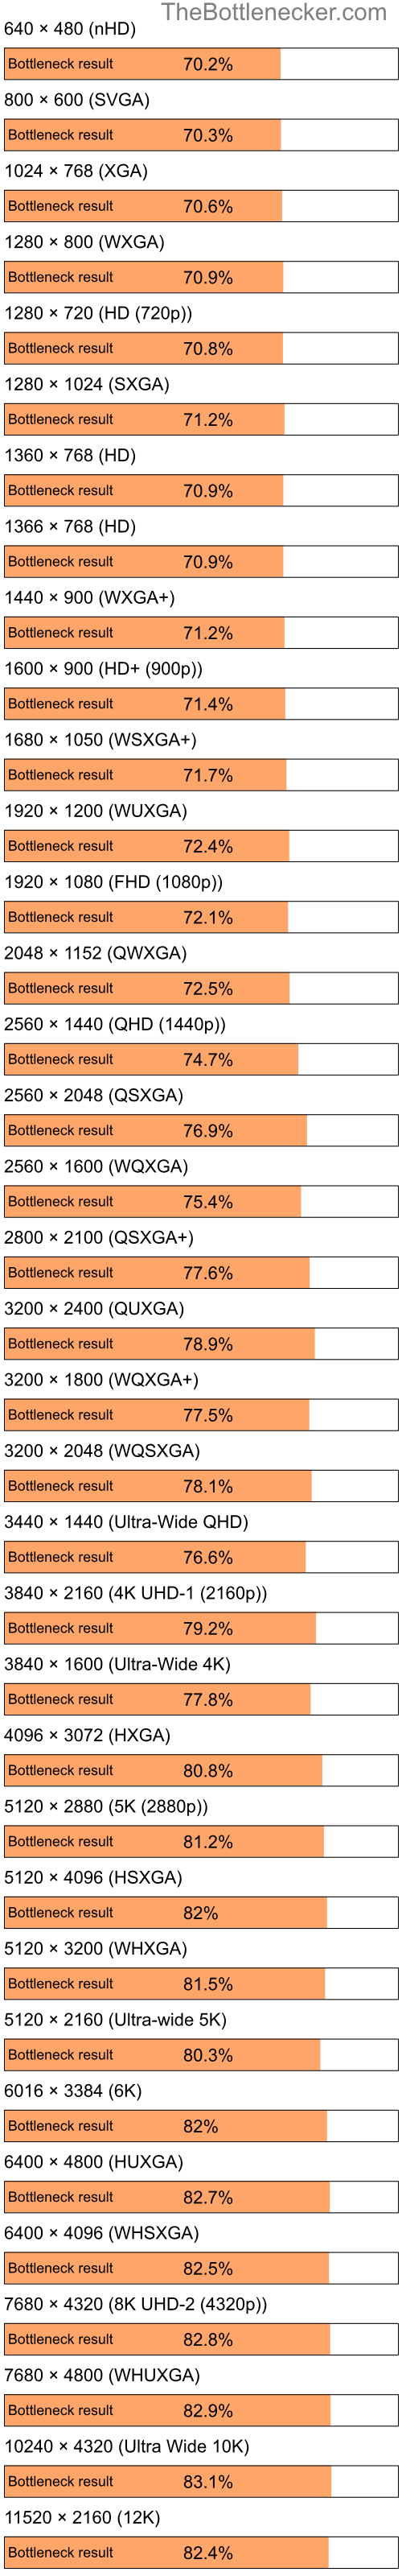 Bottleneck results by resolution for Intel Pentium 4 and AMD Mobility Radeon HD 4200 in Graphic Card Intense Tasks